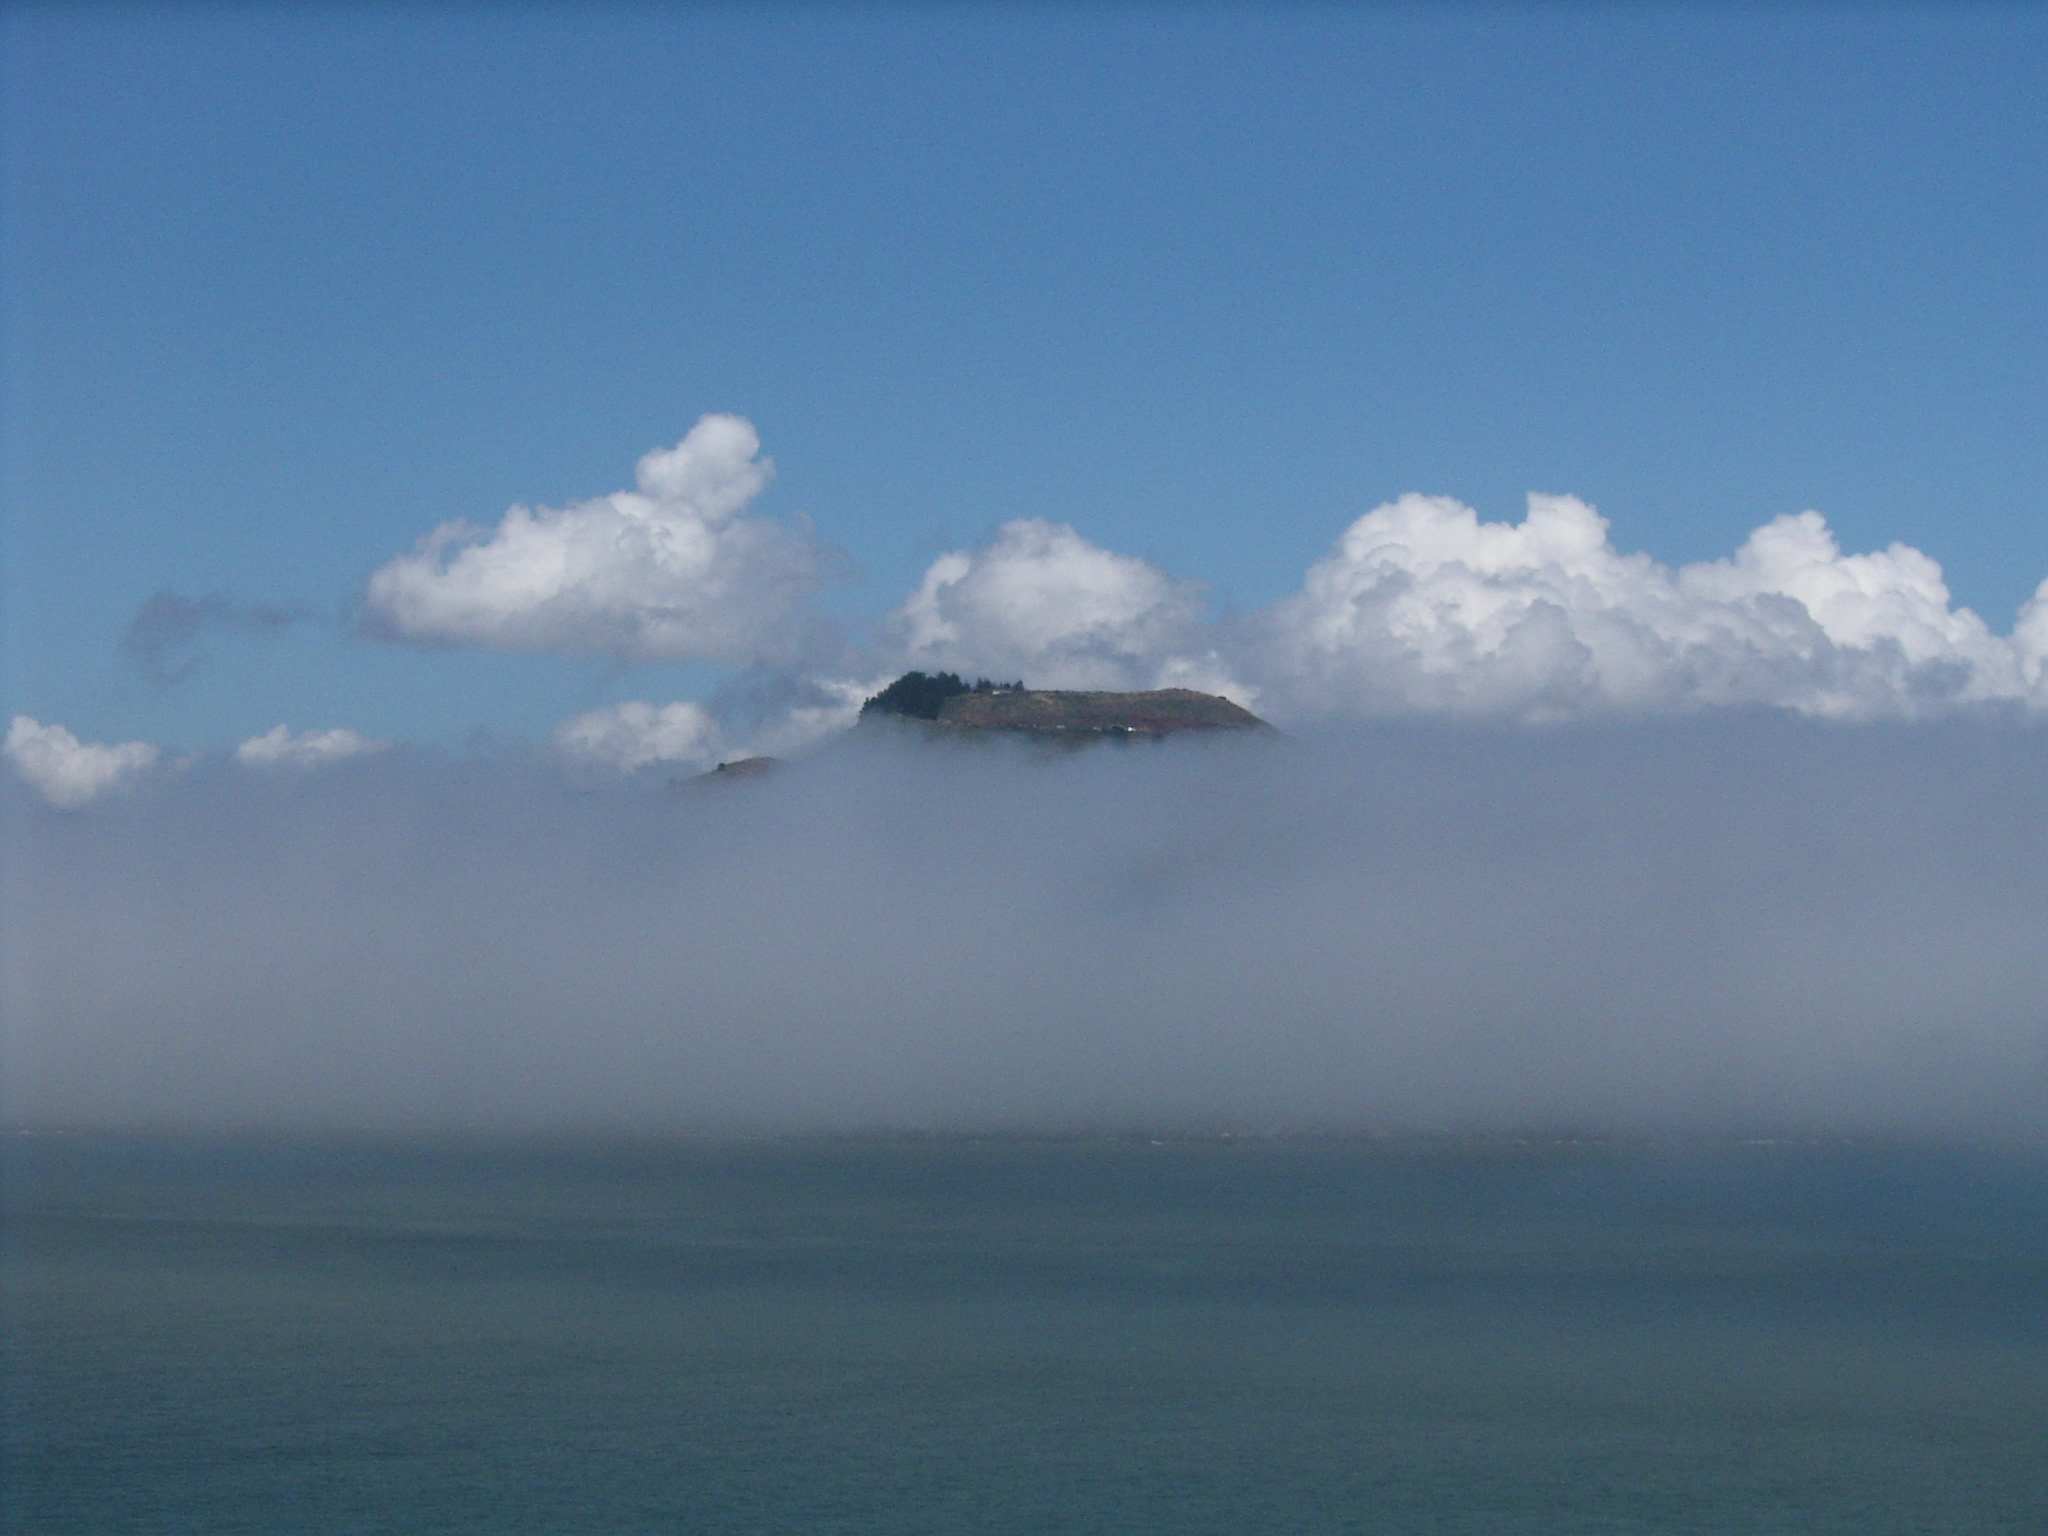 Top of marin headlands emerging from the afternoon fog